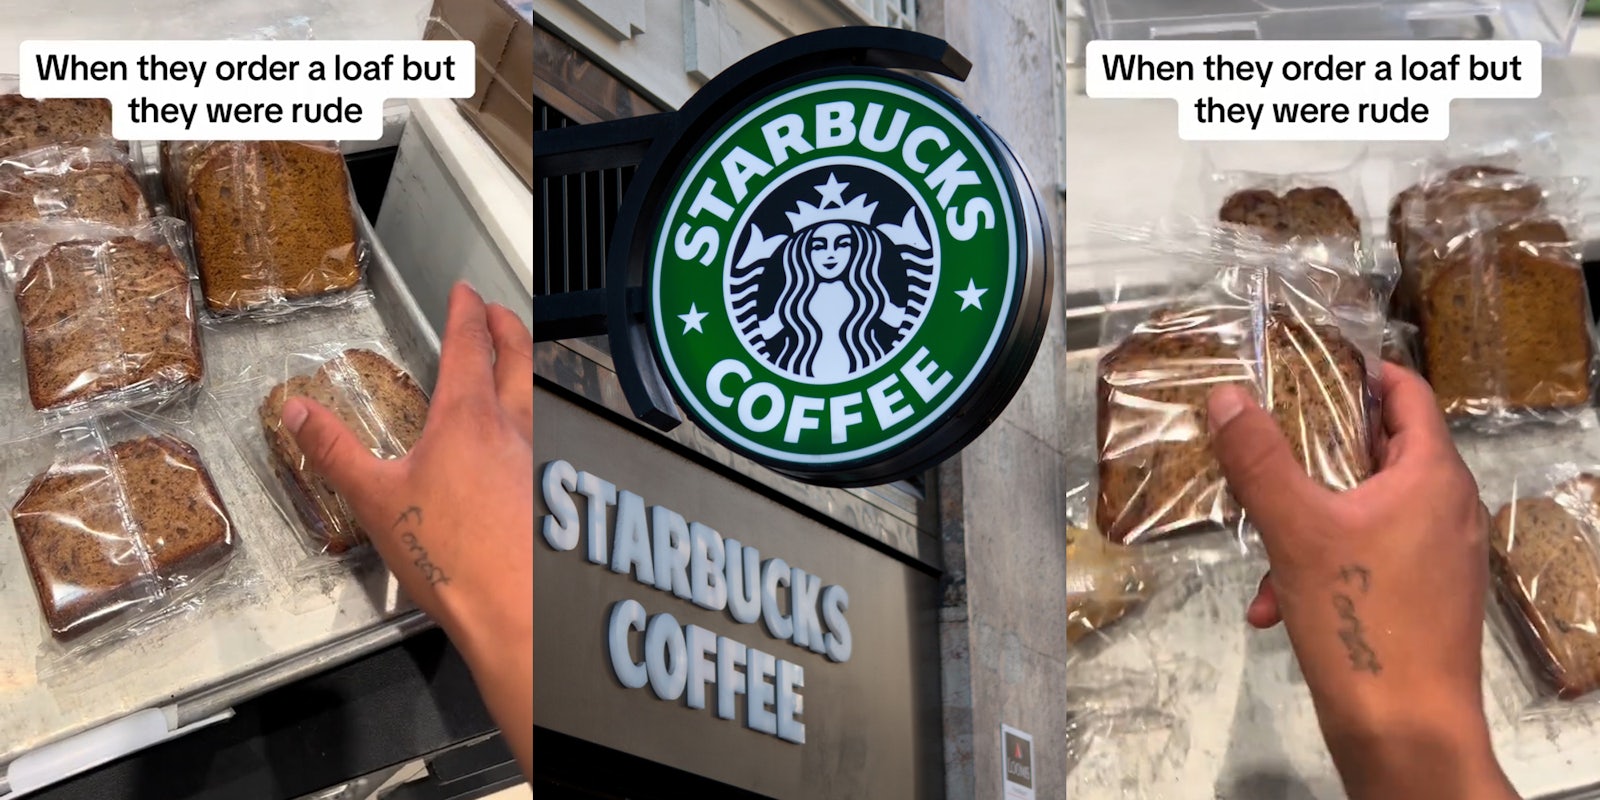 Starbucks worker grabbing bread with caption 'When they order a loaf but they were rude' (l) Starbucks signs (c) Starbucks worker grabbing bread with caption 'When they order a loaf but they were rude' (r)